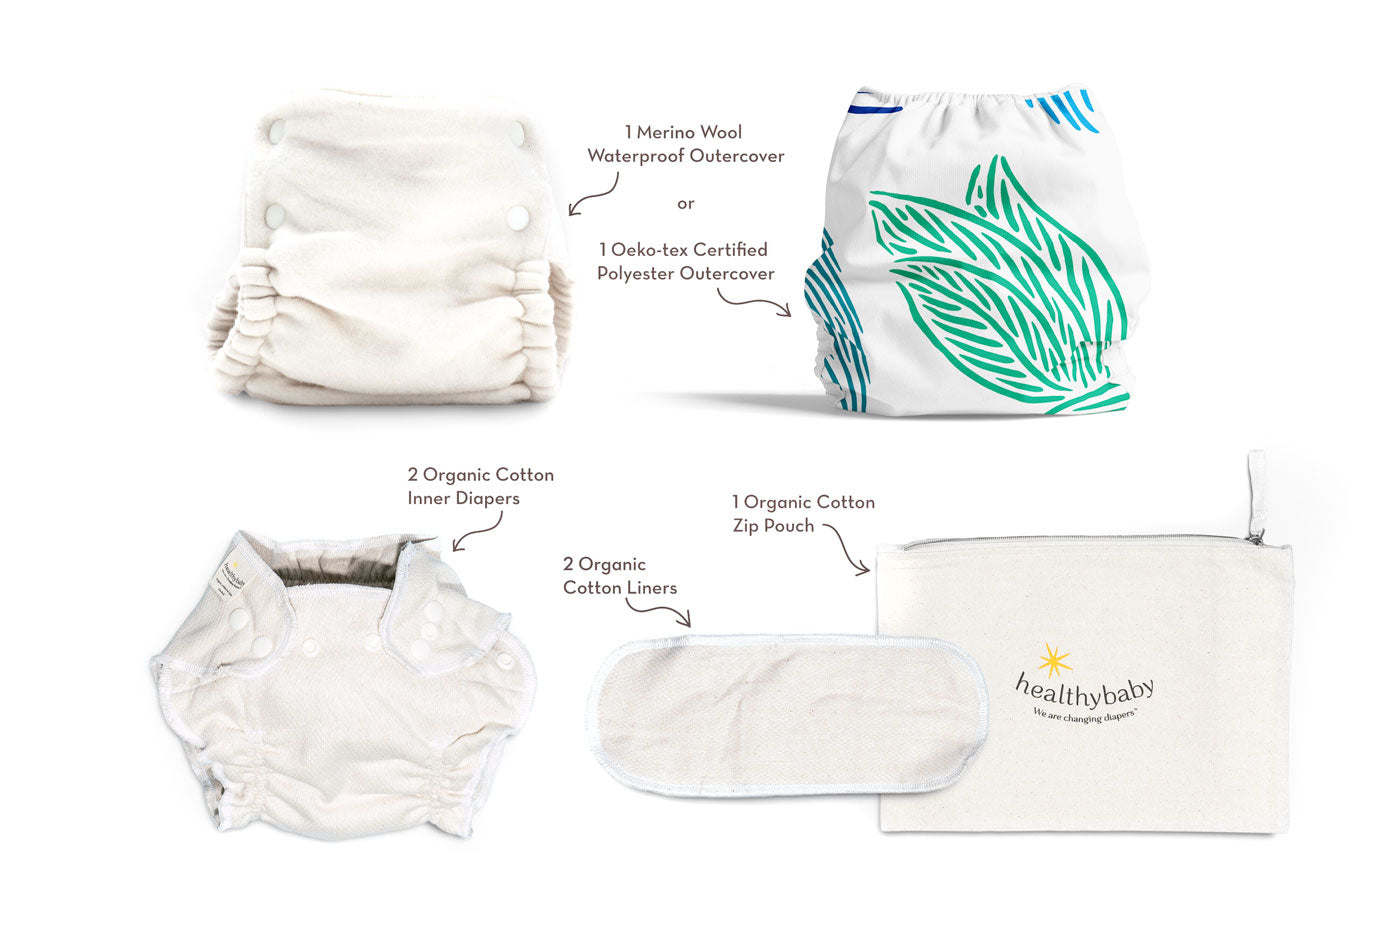 Organic Baby Cotton Cloths for Diaper Change and Baby Bath Time